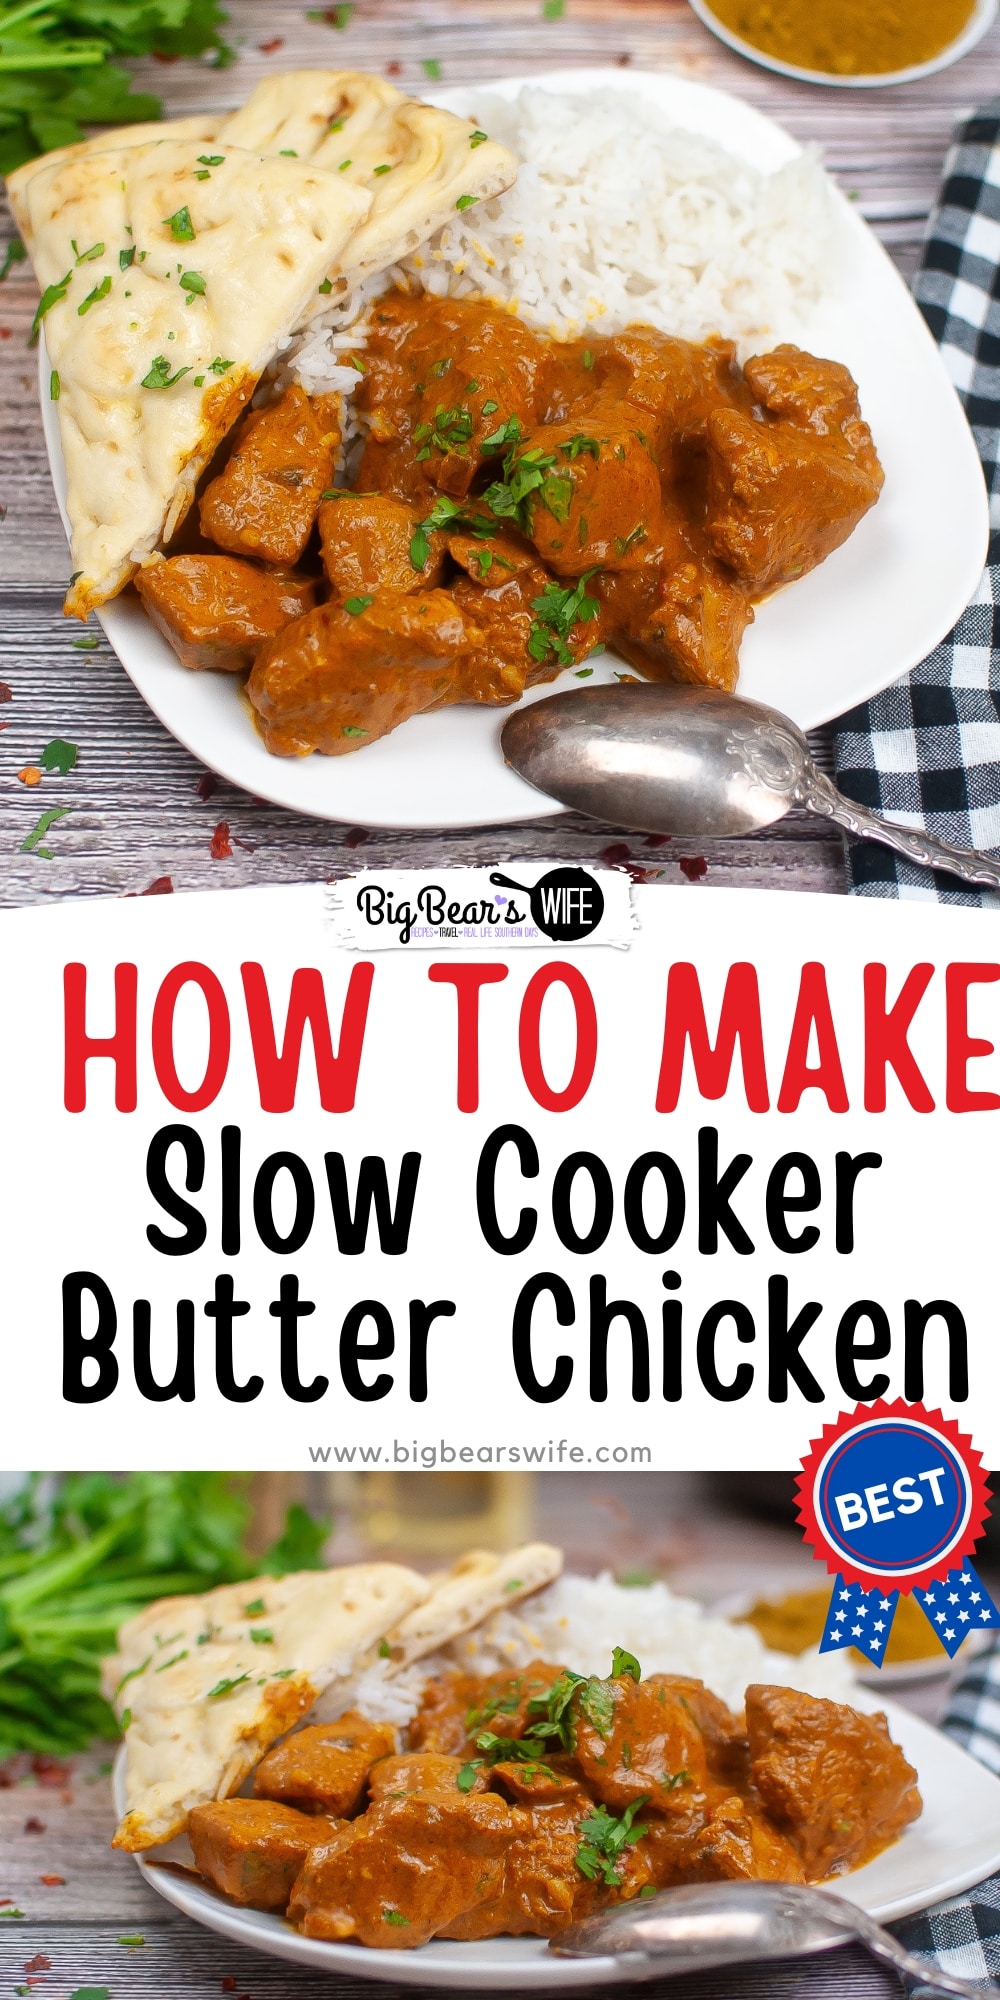 Uncover the secrets to making the perfect butter chicken in a slow cooker. From the rich blend of spices to the creamy texture of the sauce, this recipe will have your taste buds dancing with delight. via @bigbearswife